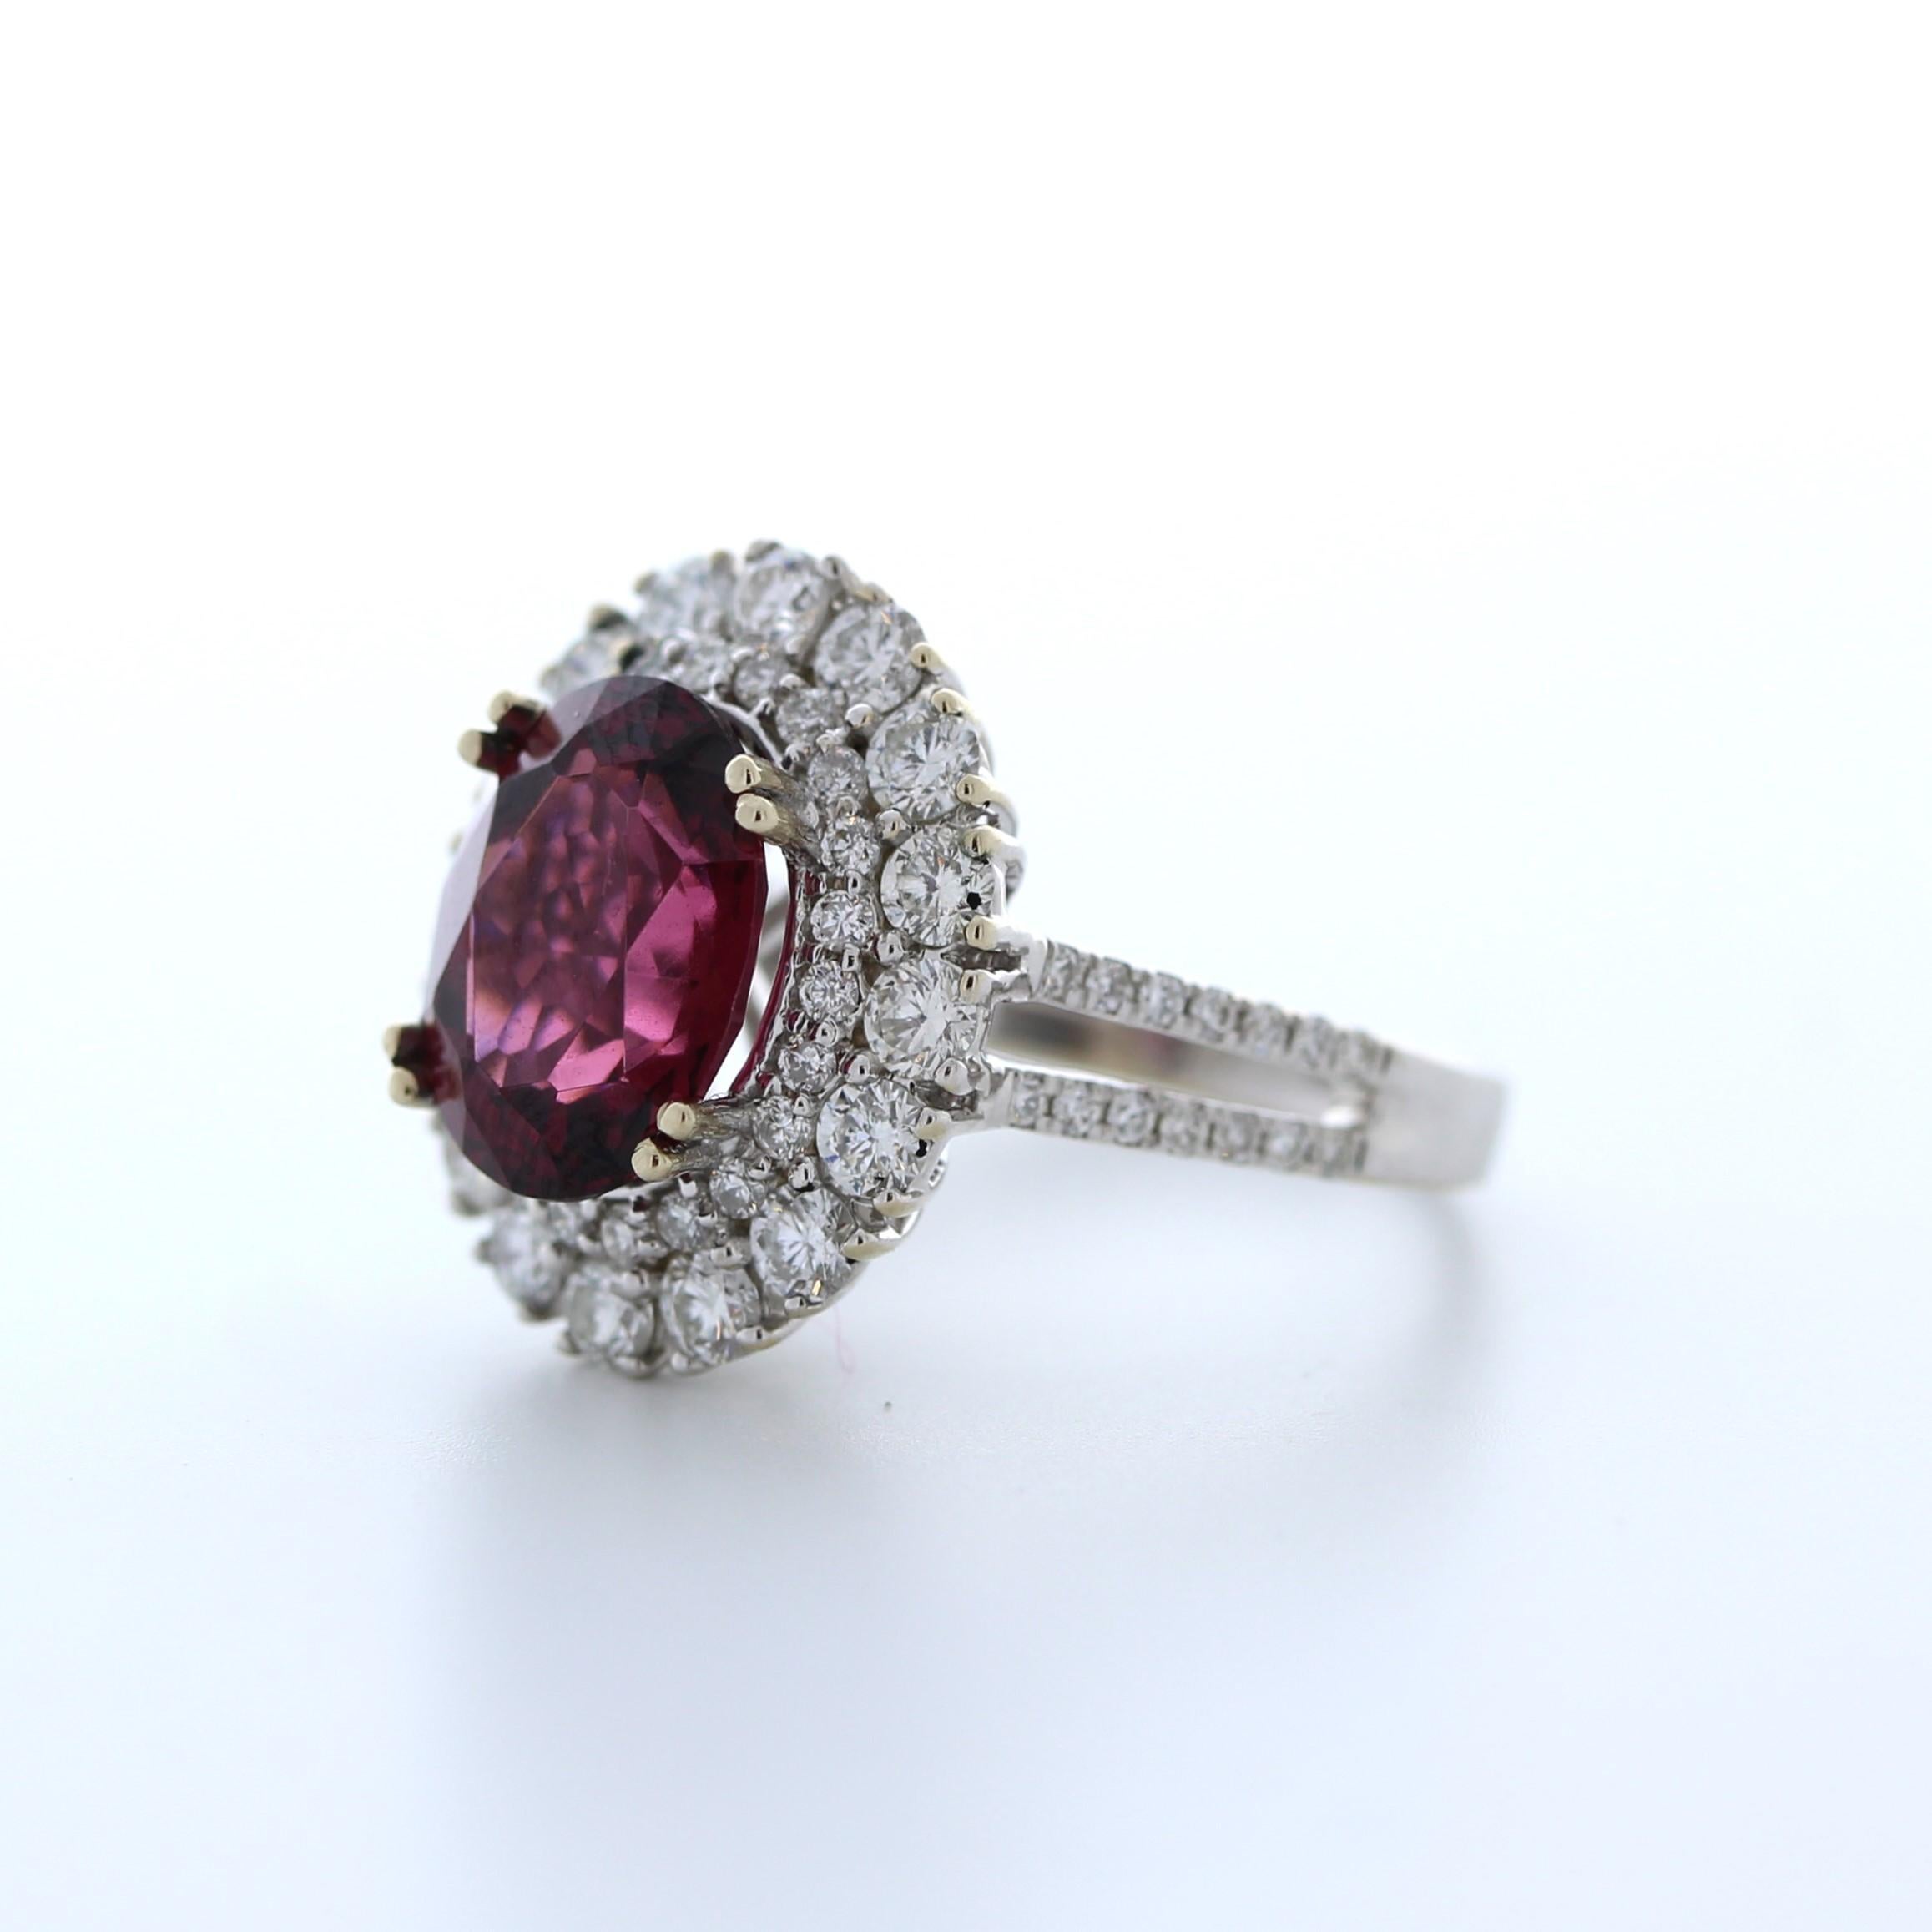 This stunning 1.47 carat weight reddish pink garnet fashion ring is a bold and beautiful choice for any occasion. The garnet is a rich shade of reddish pink and boasts exceptional clarity and brilliance, weighing in at 1.47 carats. It is set in